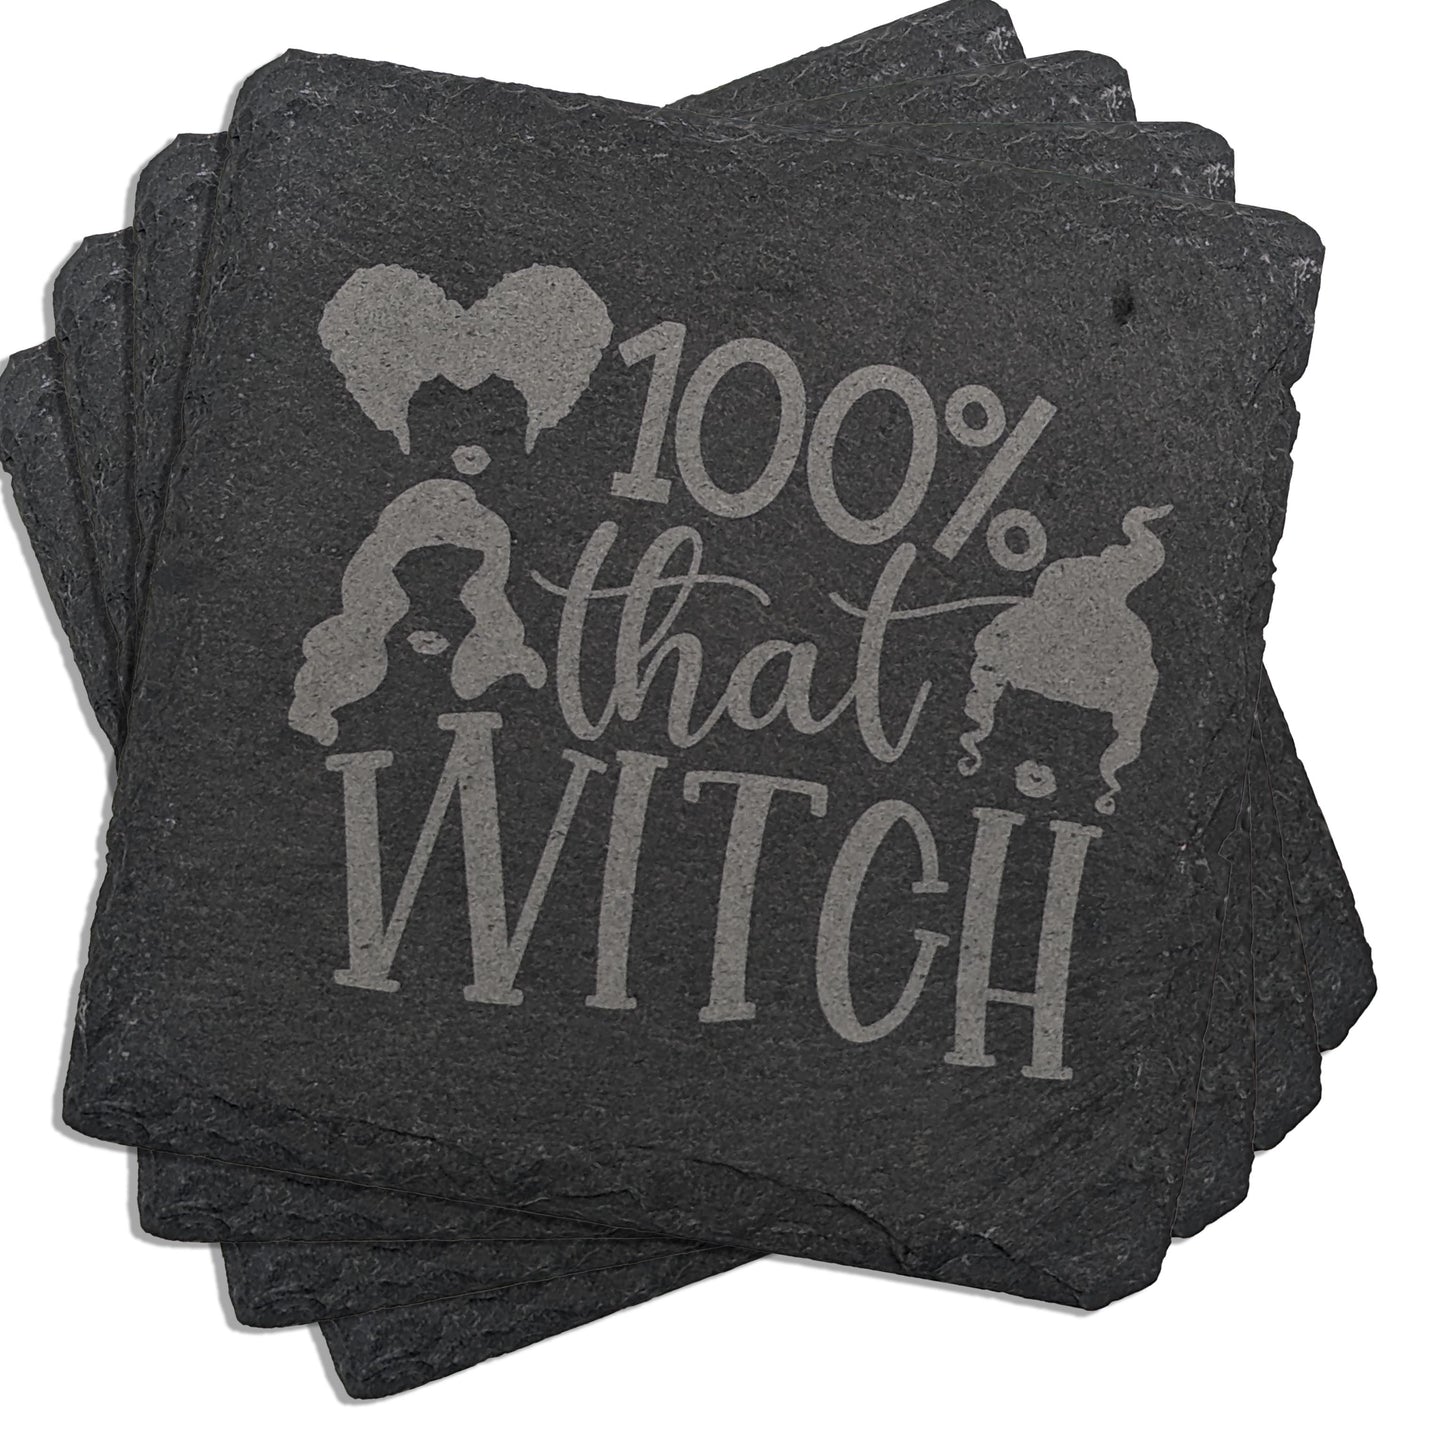 Magical Square Slate Coaster Set - '100% That Witch' Laser Engraved (4 Pieces)